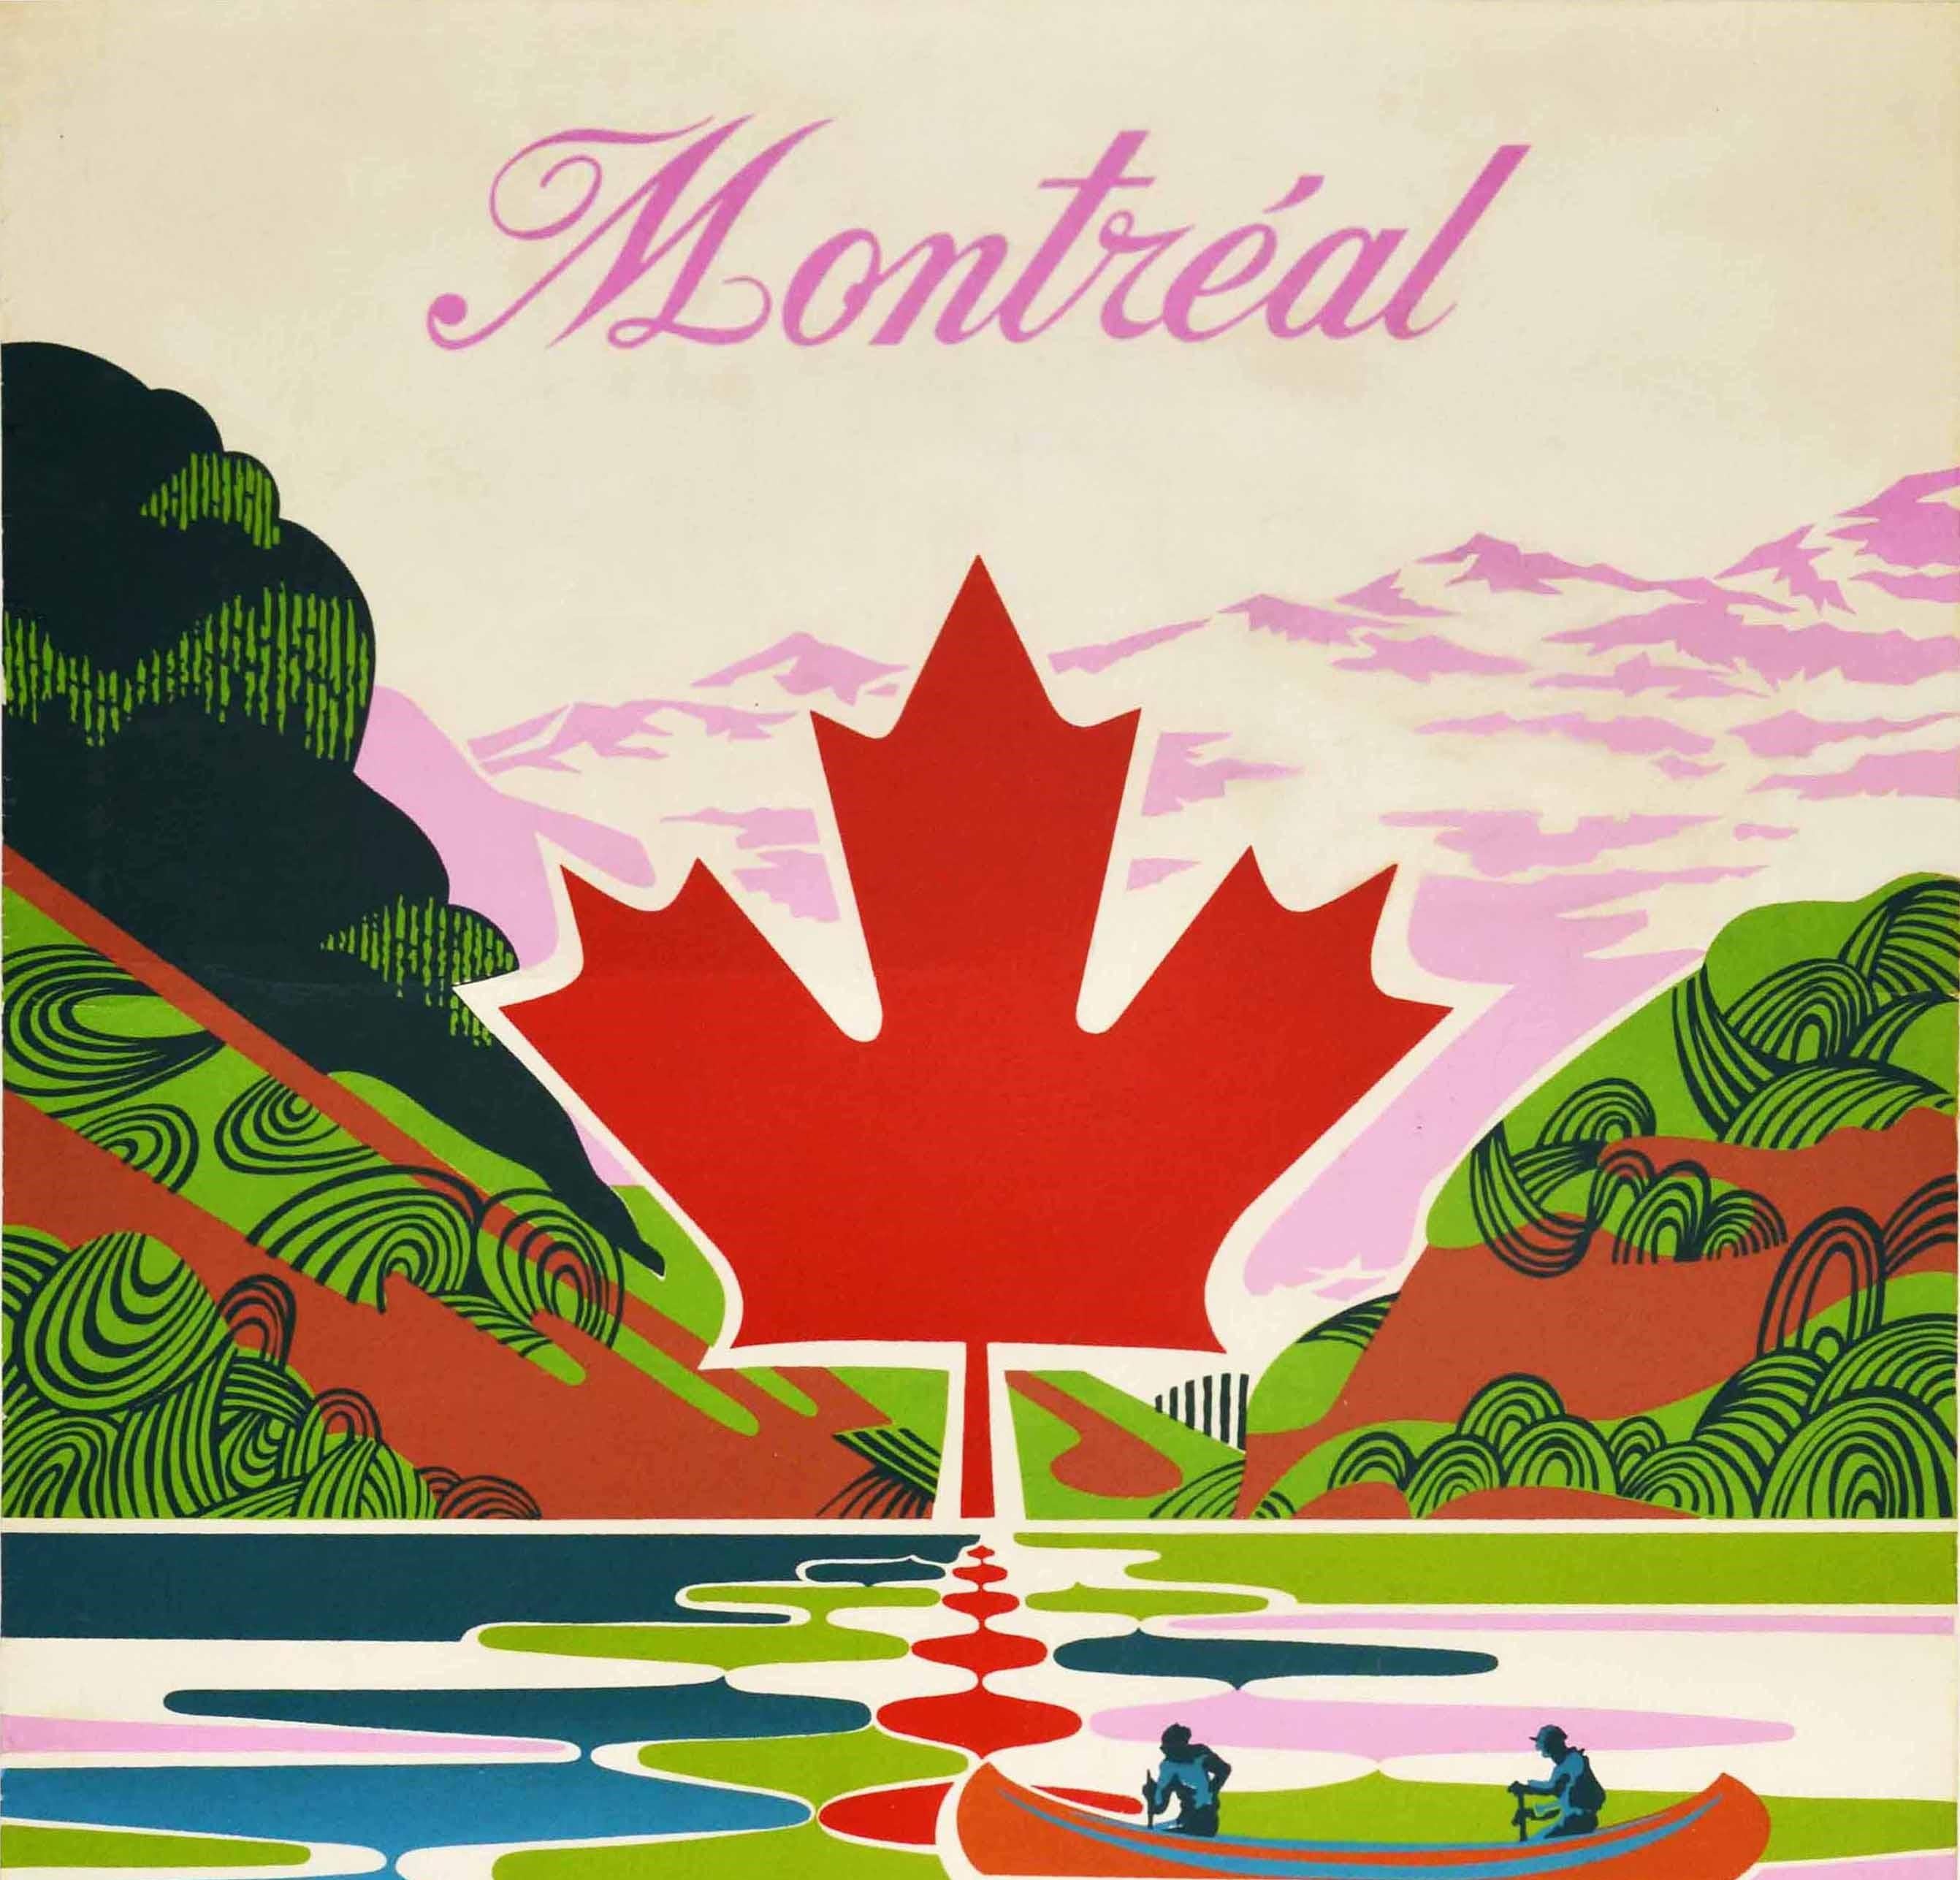 Original Vintage Travel Poster Montreal Canada Royal Air Maroc Maple Leaf Design - Print by Unknown